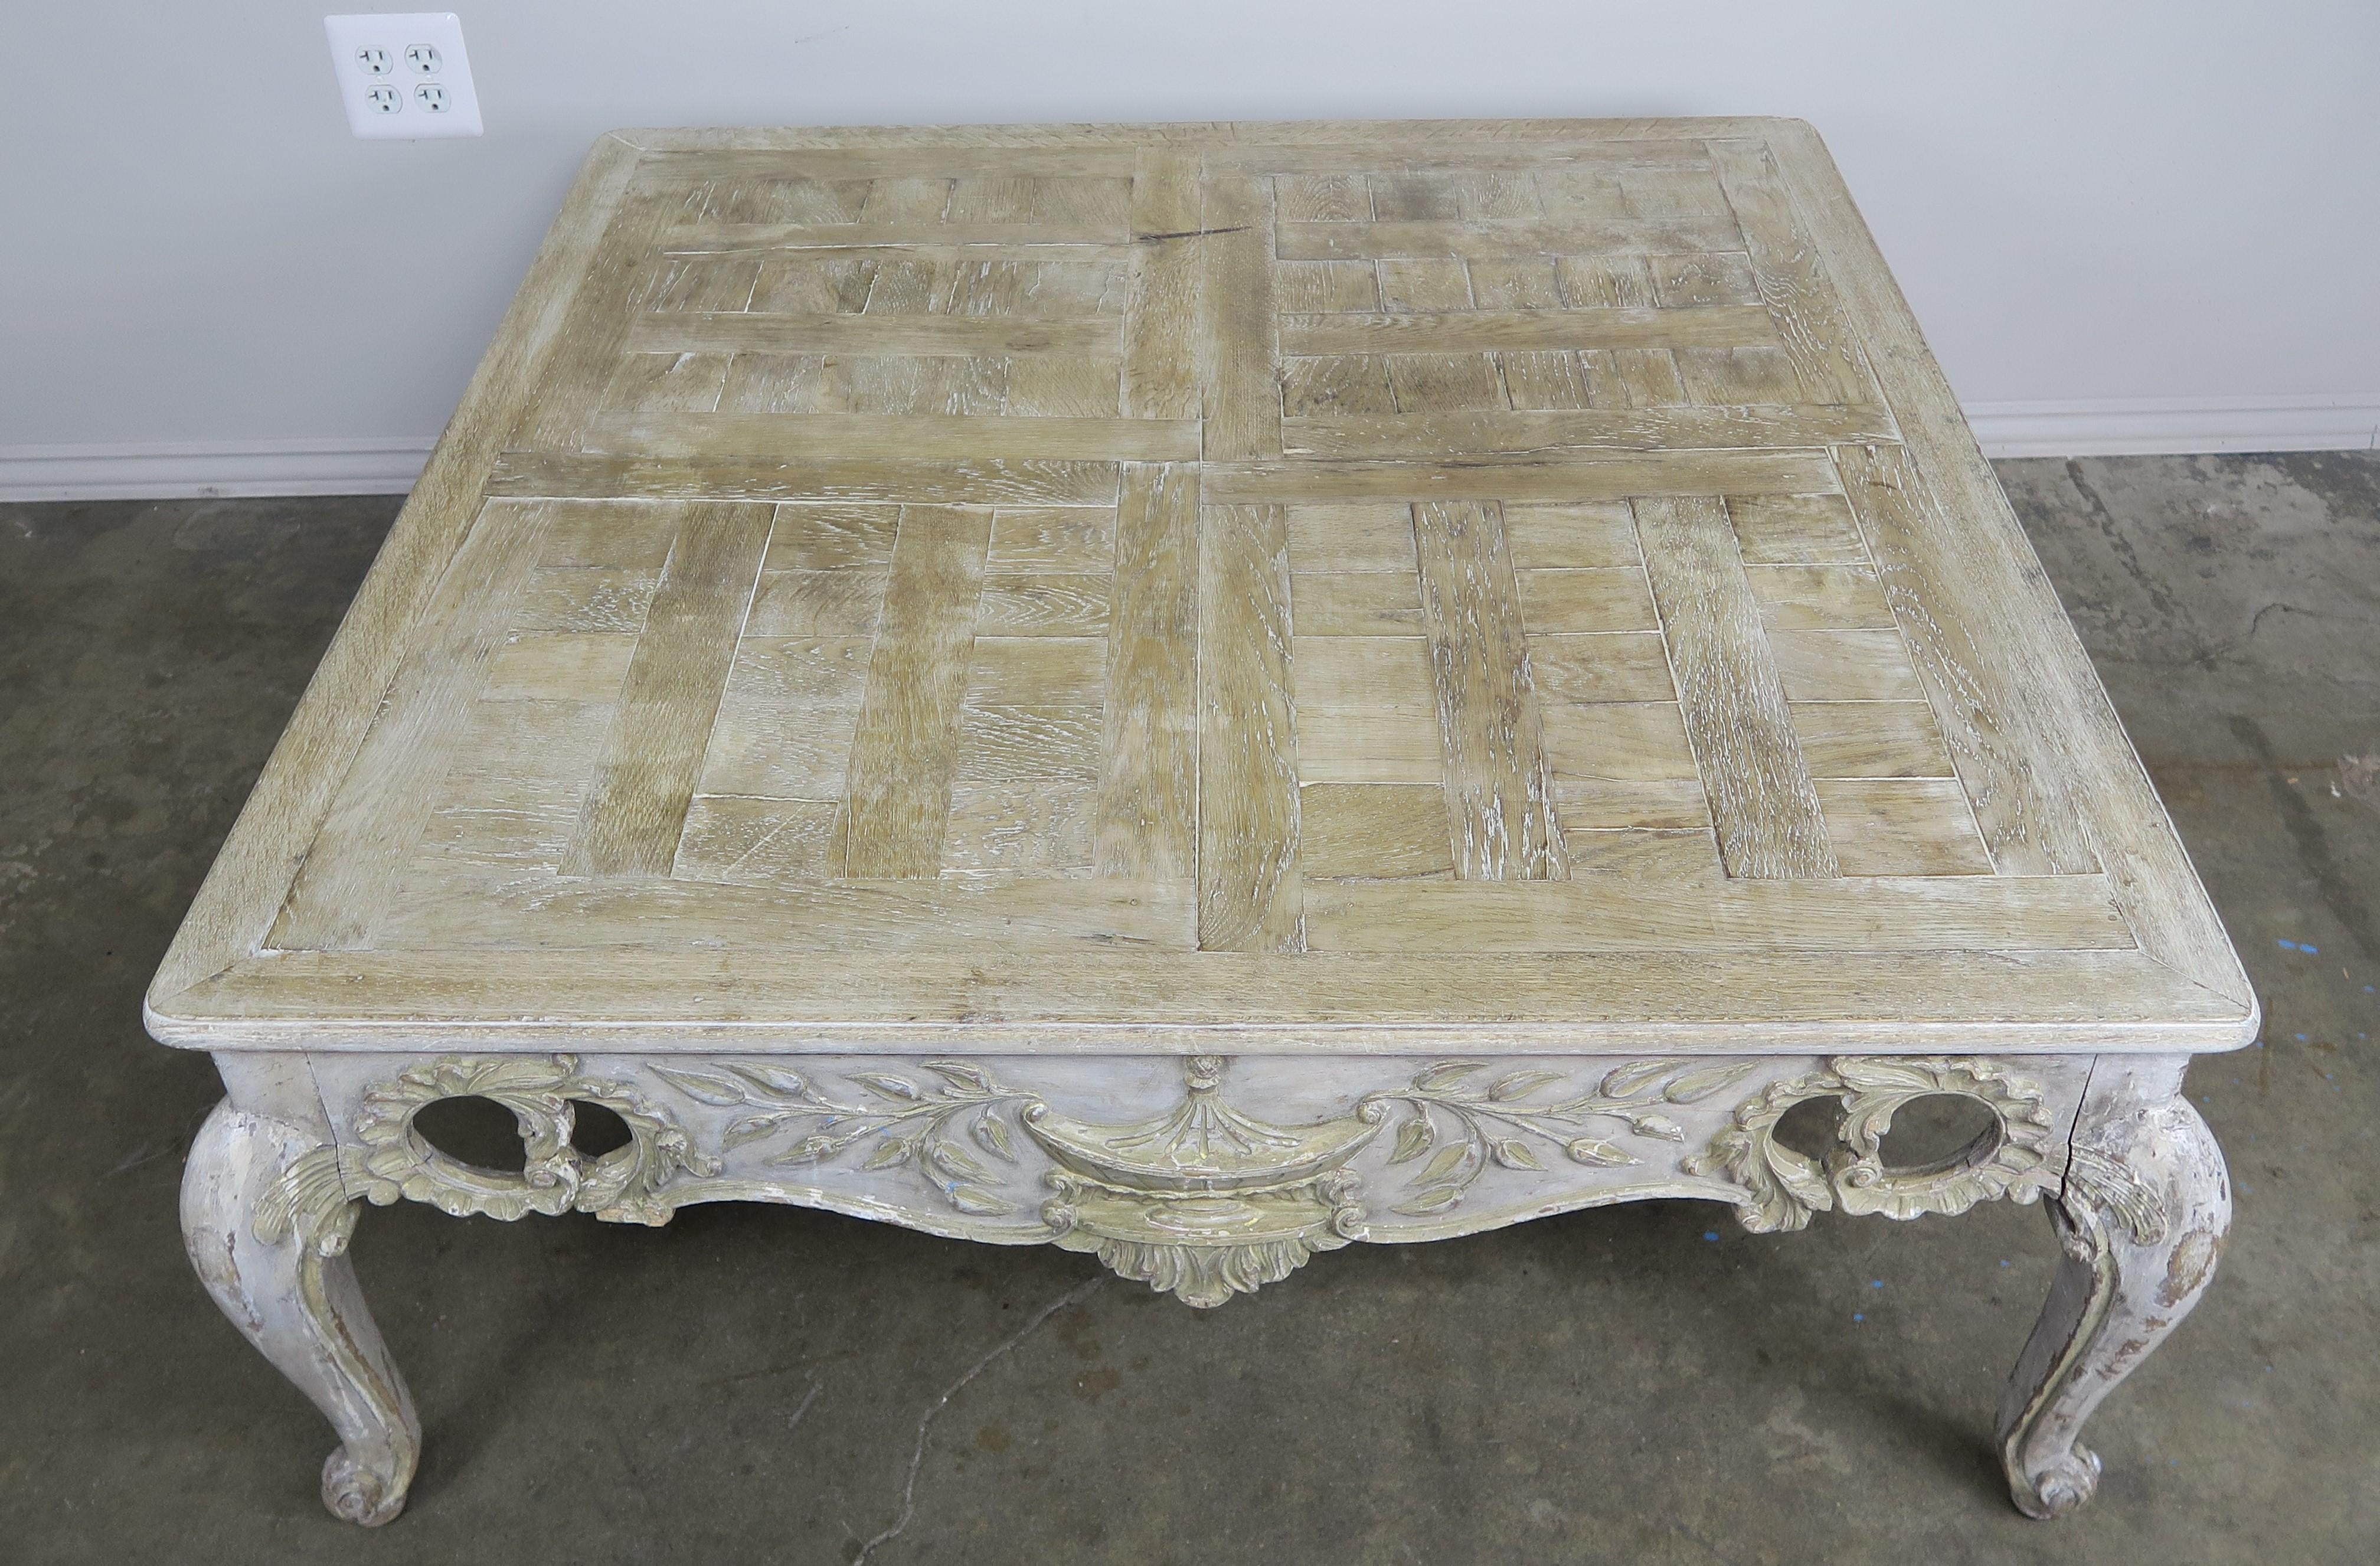 French Provincial style carved wood painted coffee table. The table has an urn carved on each side flanked by laurel leaves and beautiful acanthus leaf cut outs. The top is parquetry and sits on four cabriole shaped legs that end in rams head feet.